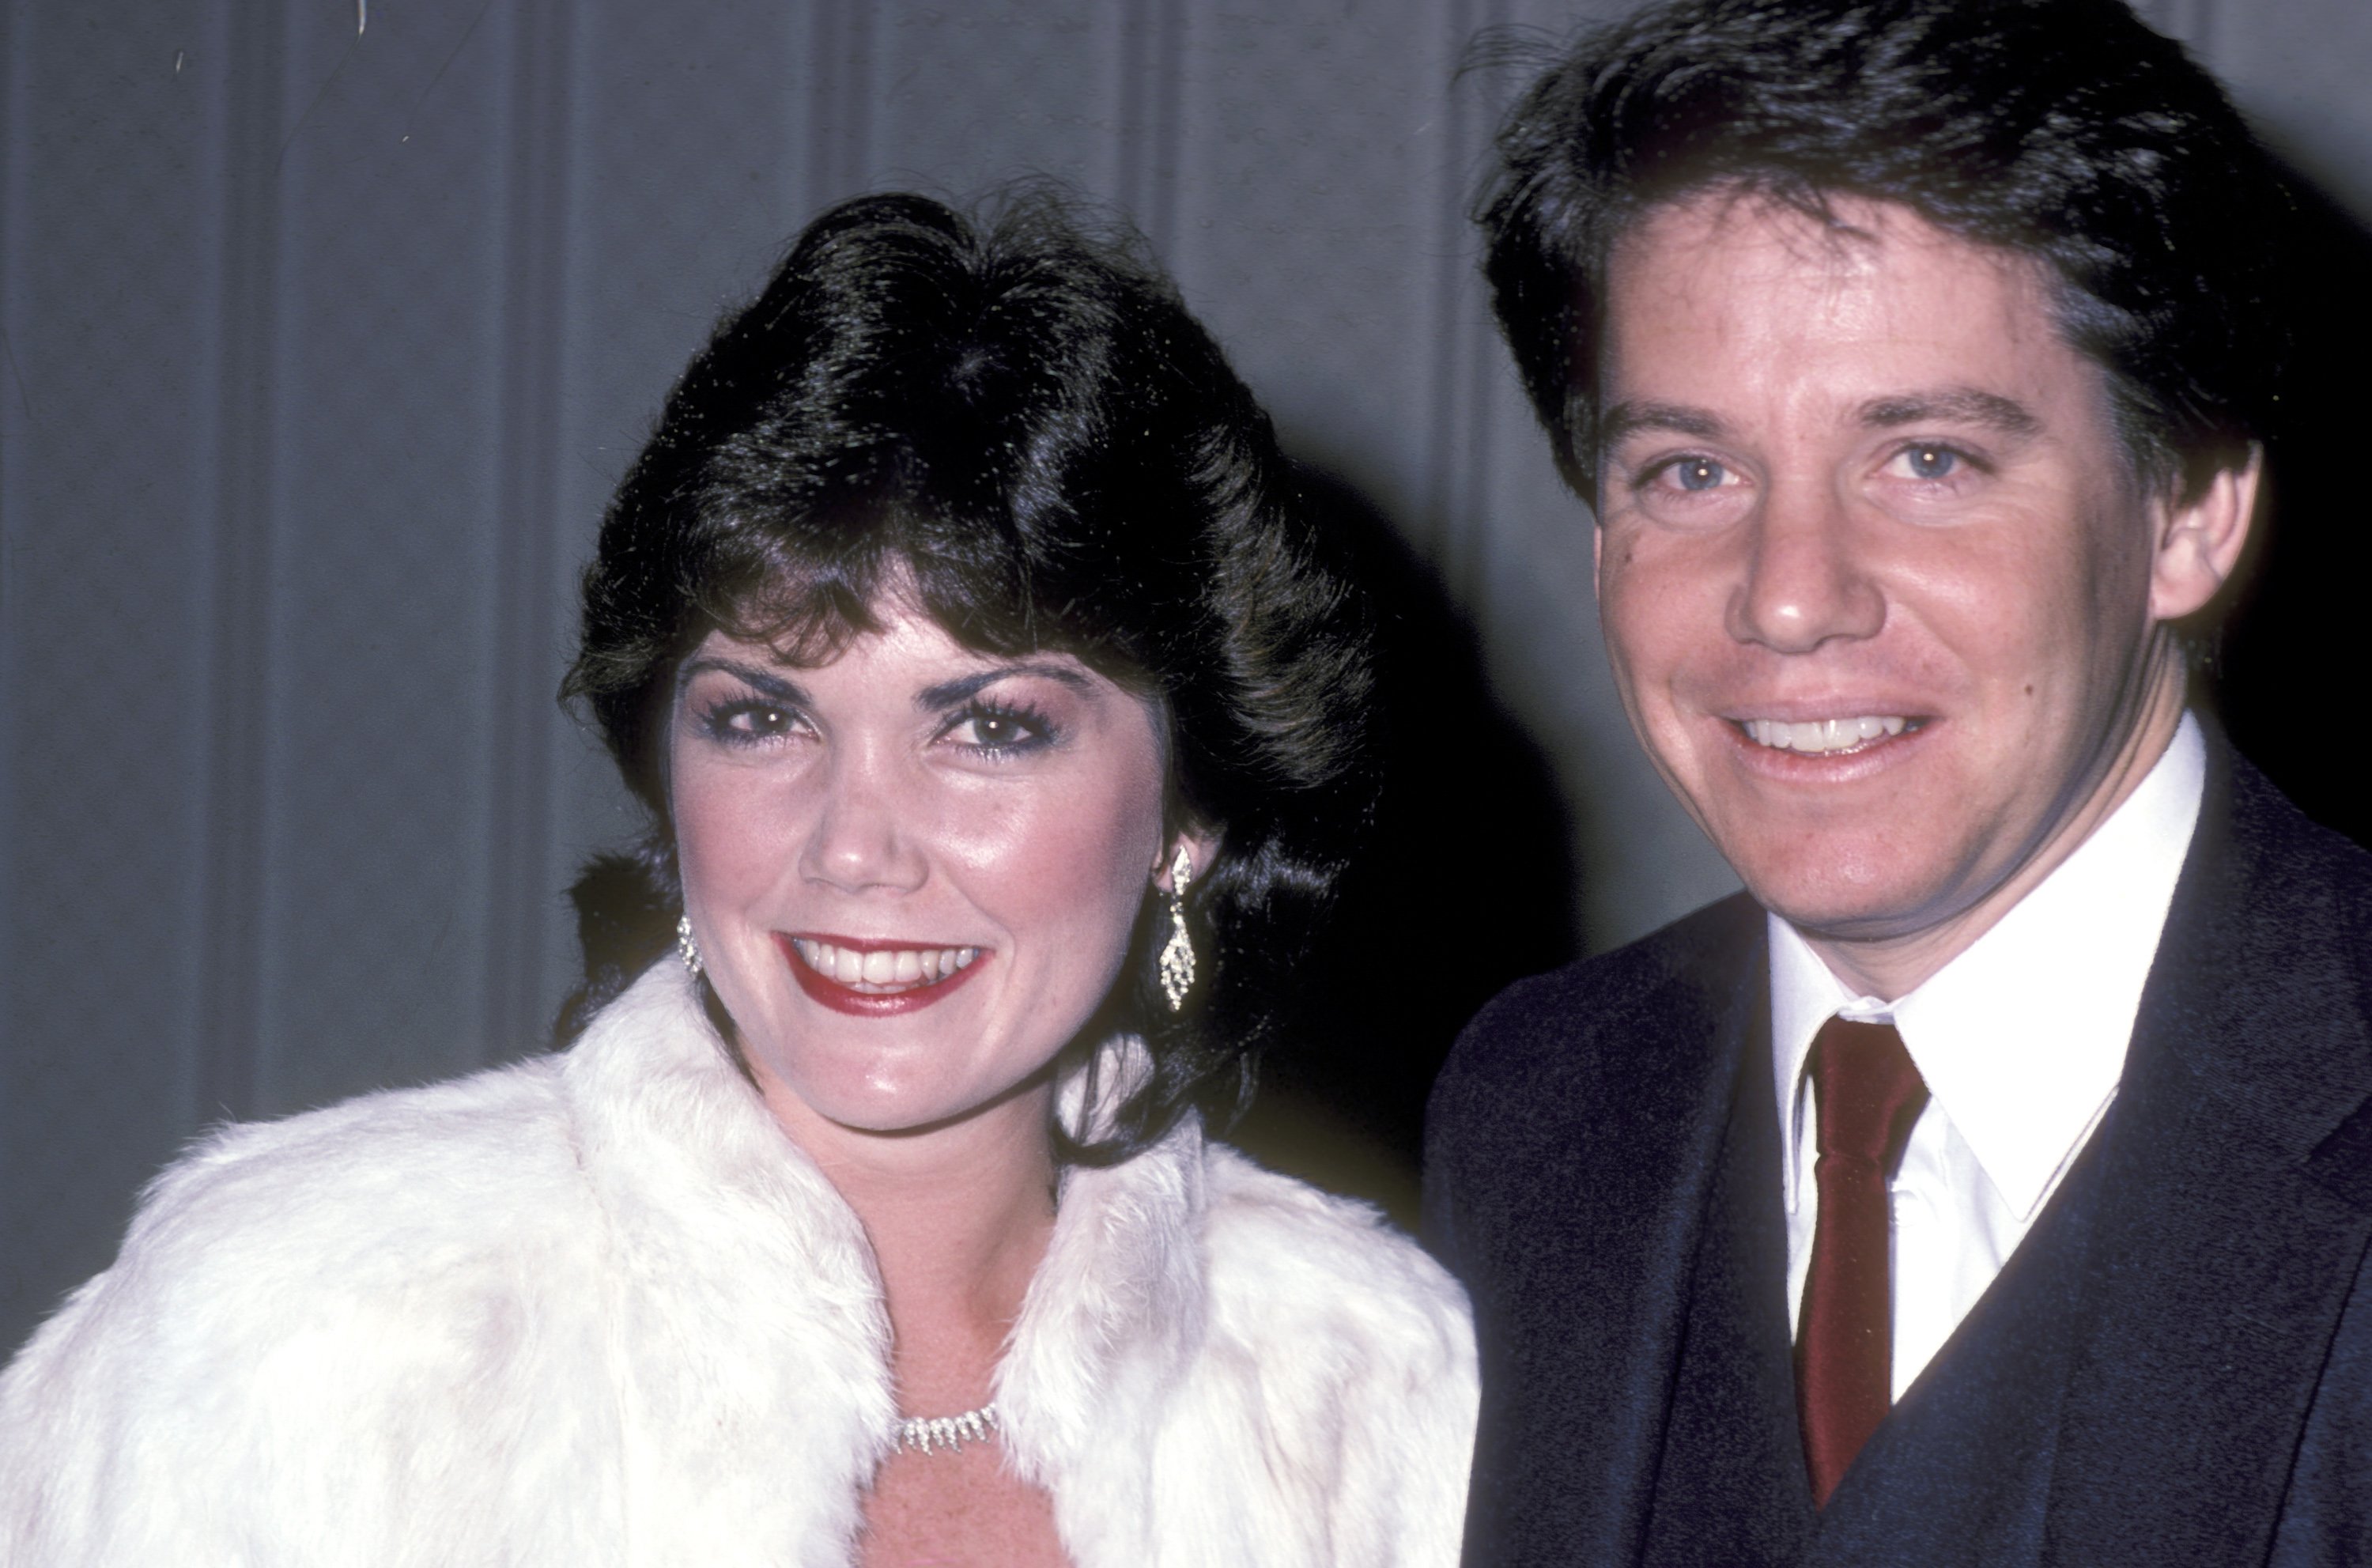 Lorrie Mahaffey and Anson Williams at the California's Governor's Committee on Employment of People with Disabilities 1982 Media Access Awards on February 4, 1982, in Los Angeles | Source: Getty Images